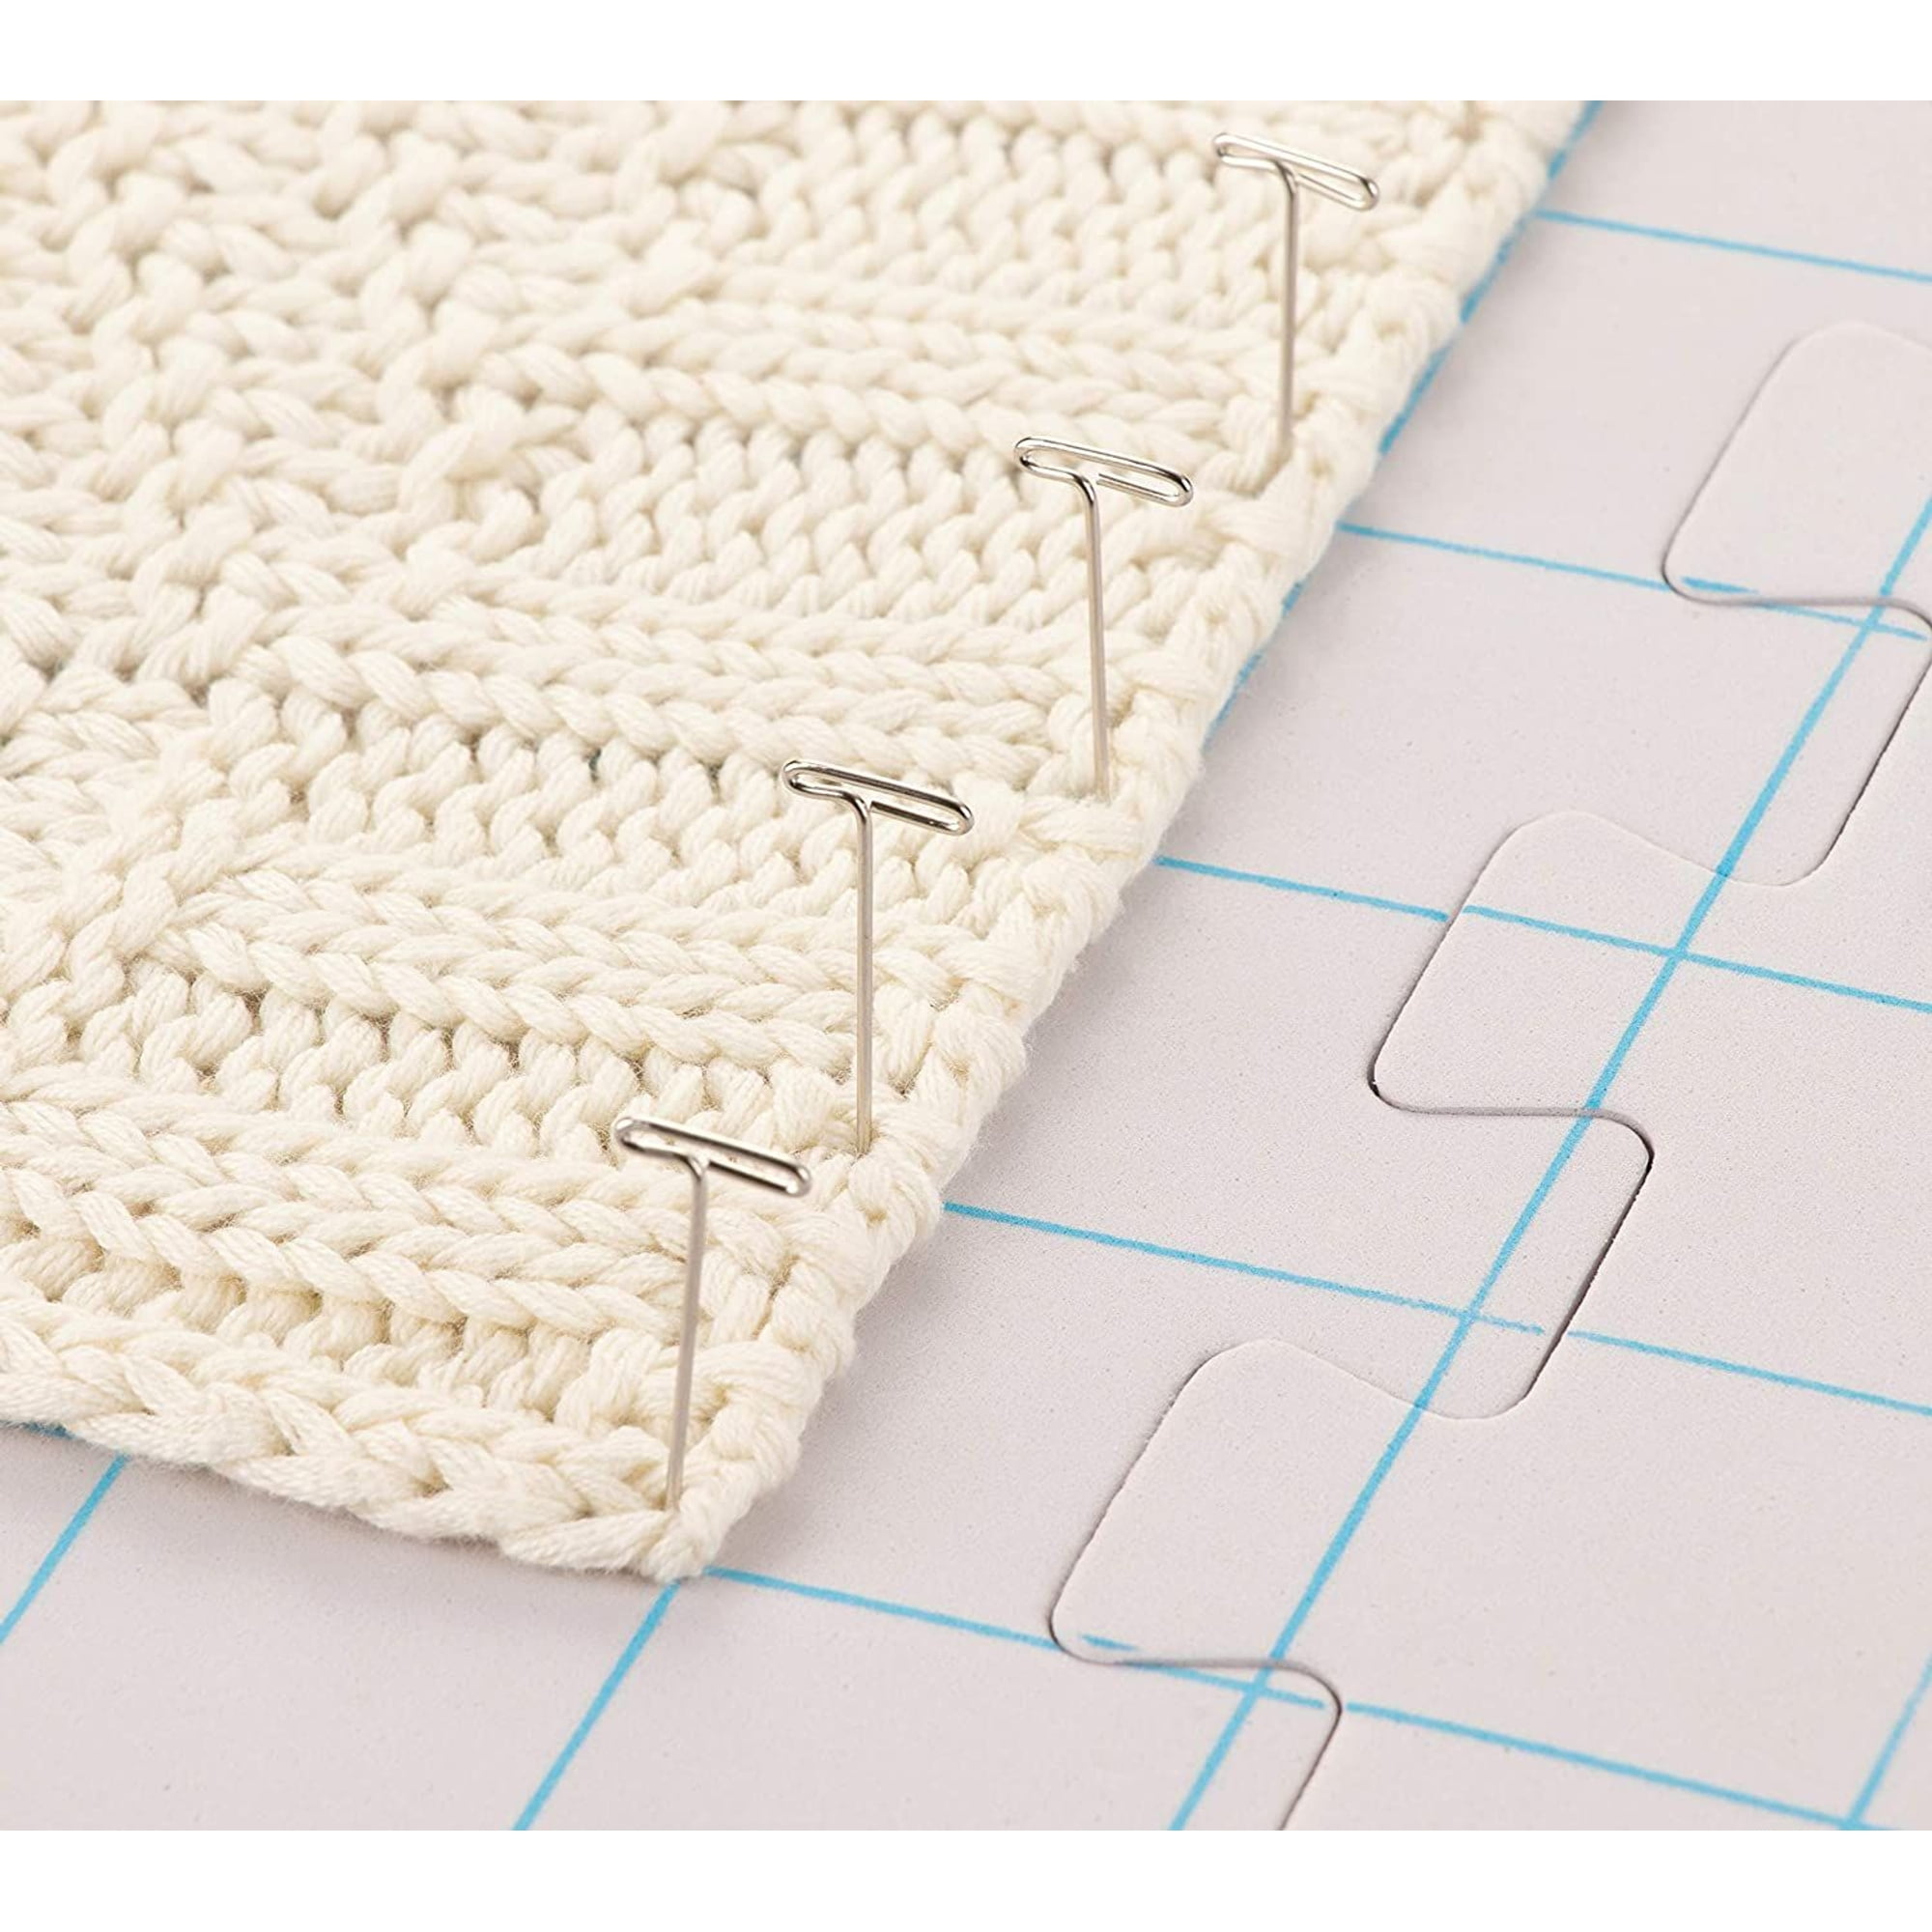 Juvale Blocking Mats for Knitting & Crochet 9 Pack with 200 T Pins and Storage Bag (12.5 in)